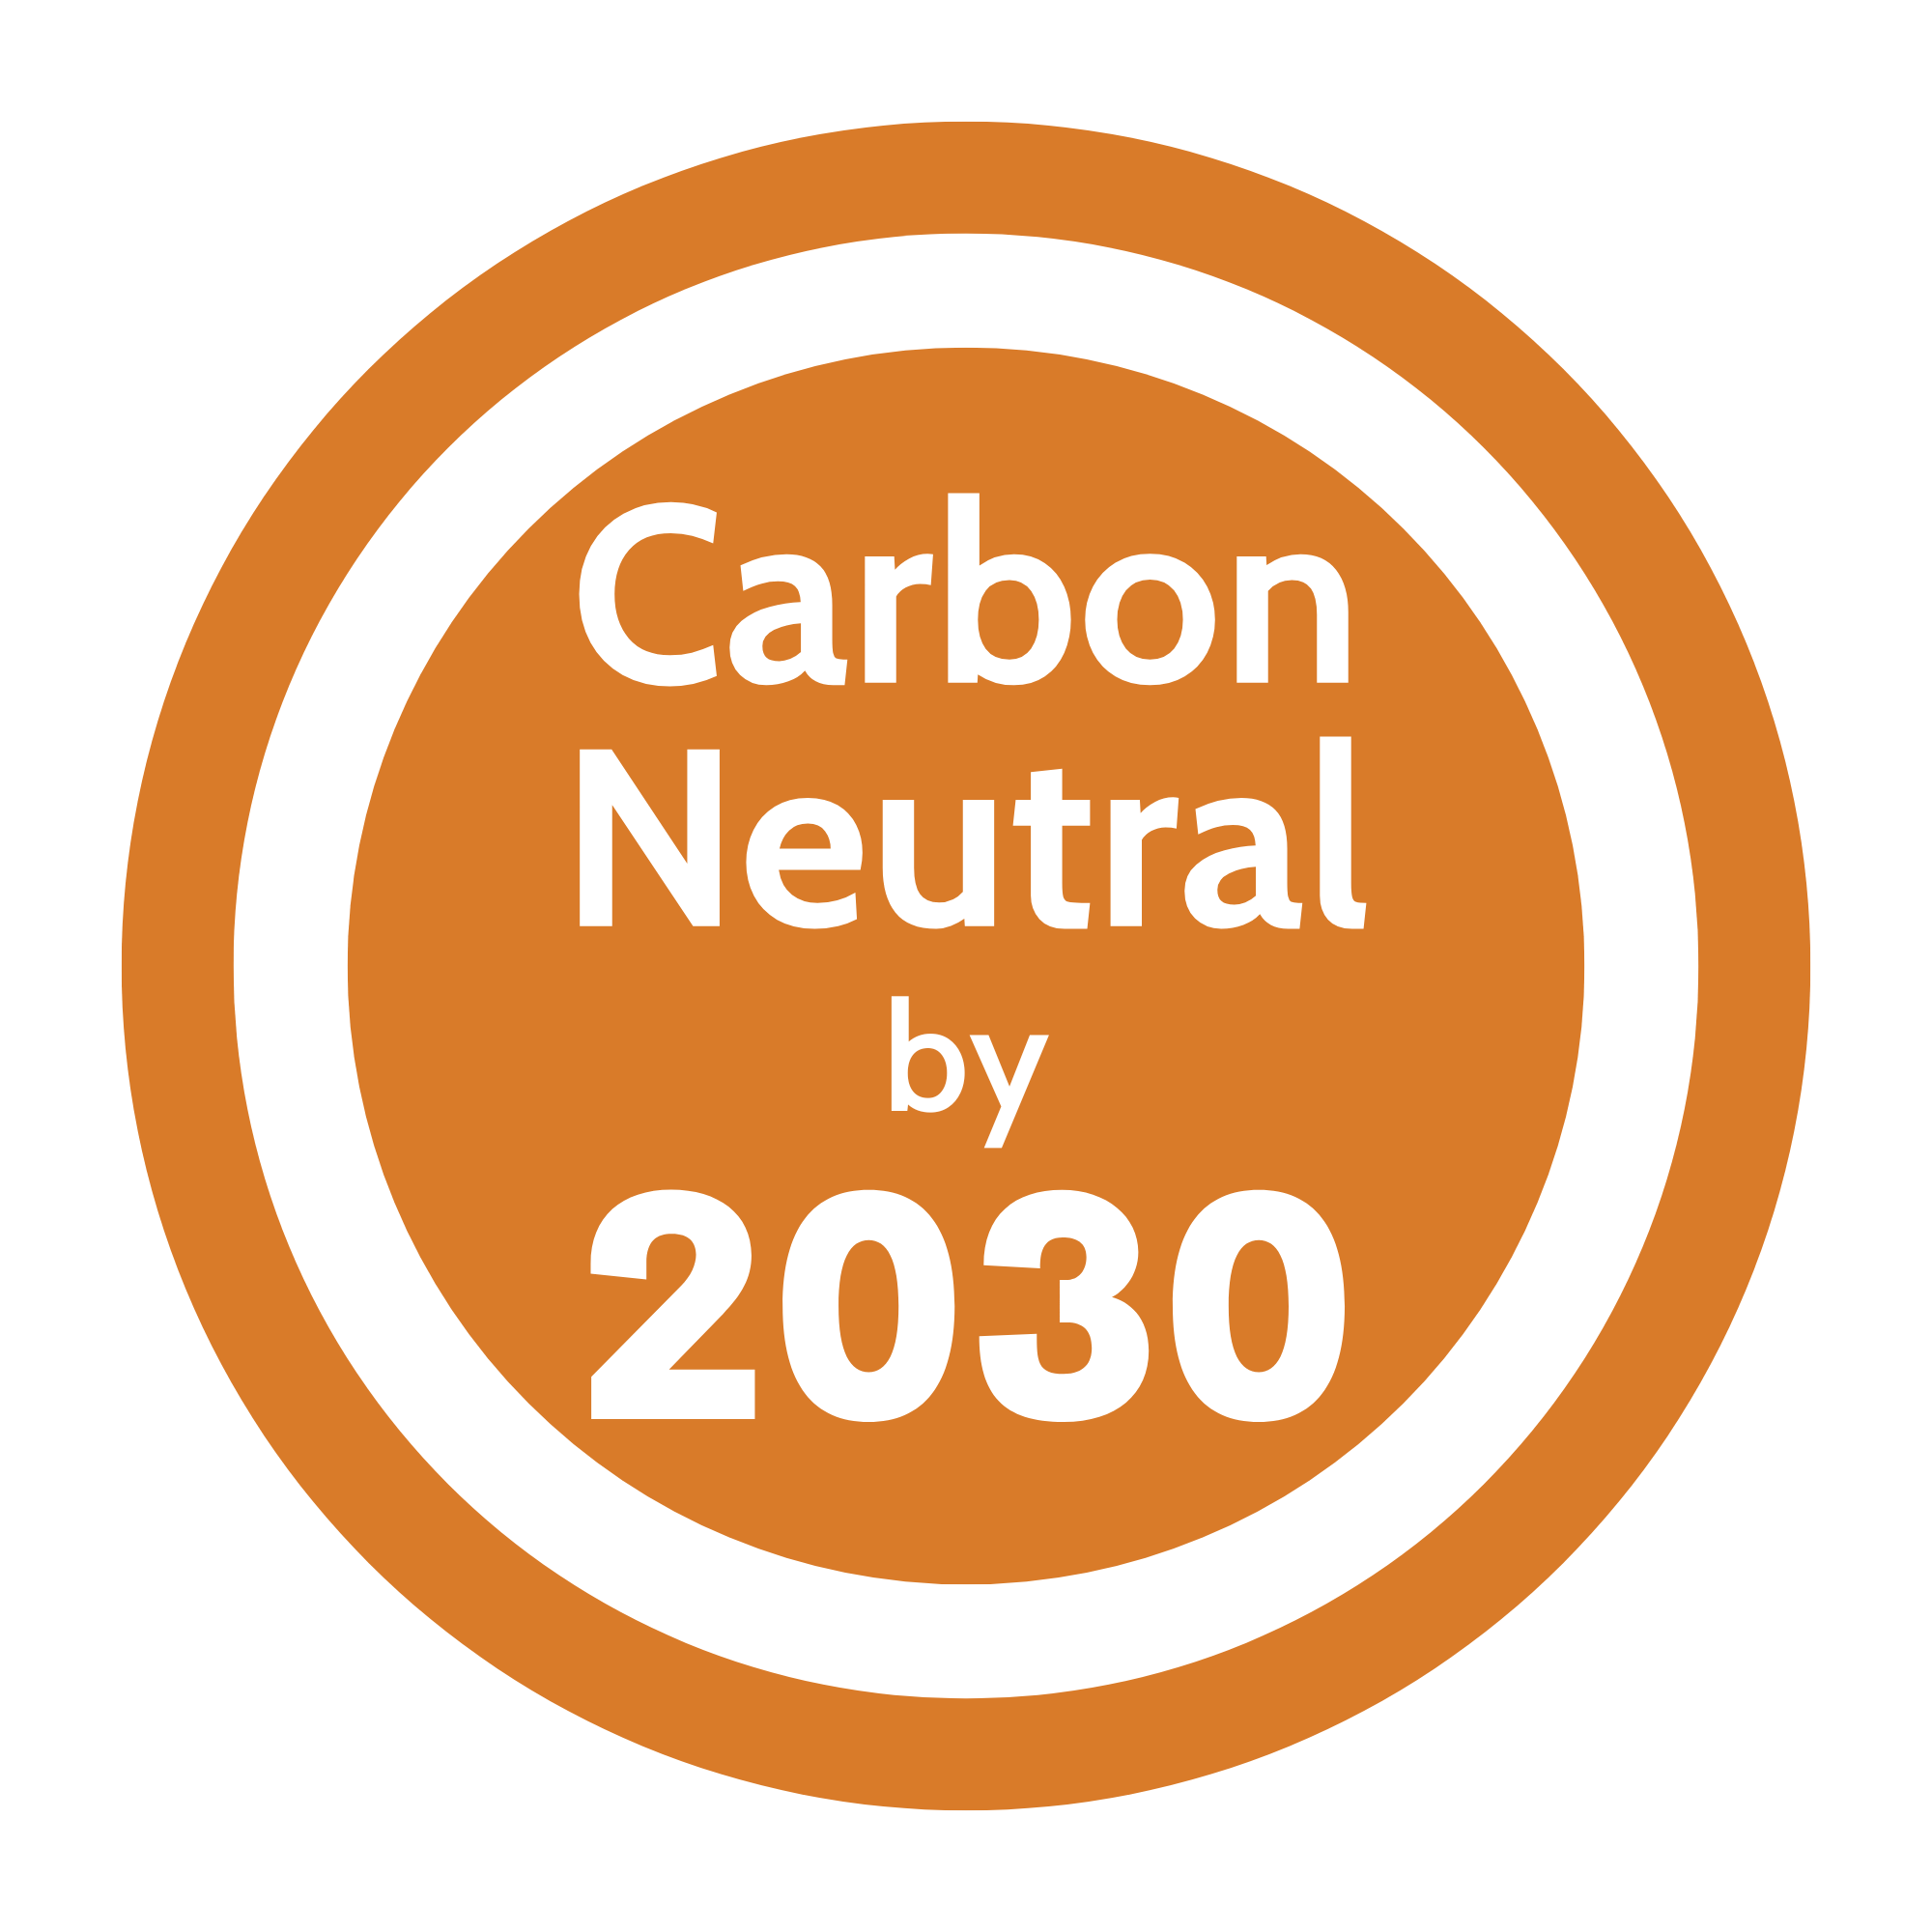 Carbon Neutral by 2030 goal icon